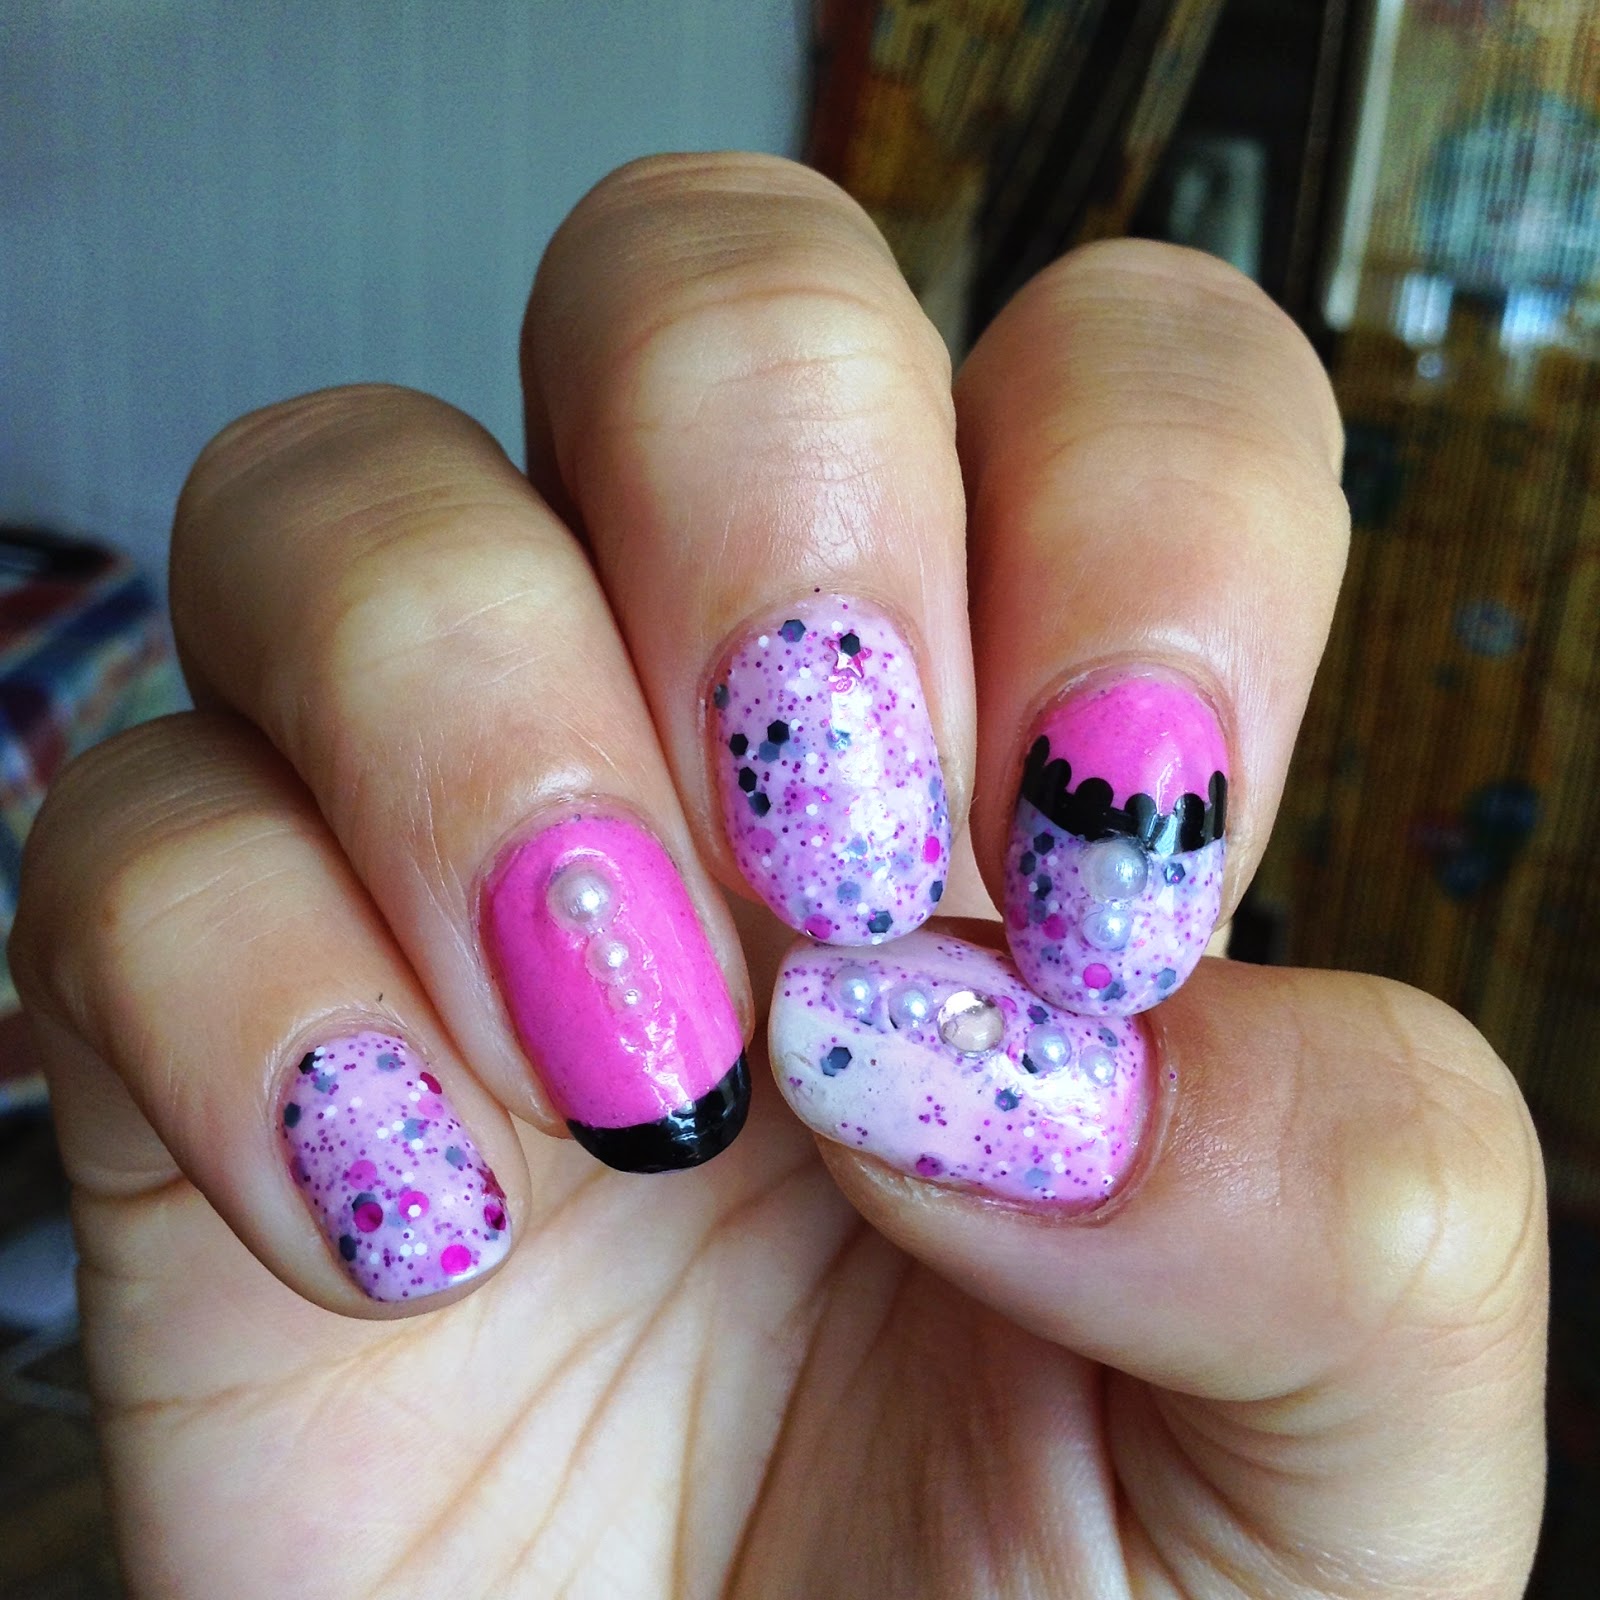 -: Day 63: Pink Nail designs - indie polish - pink manicure